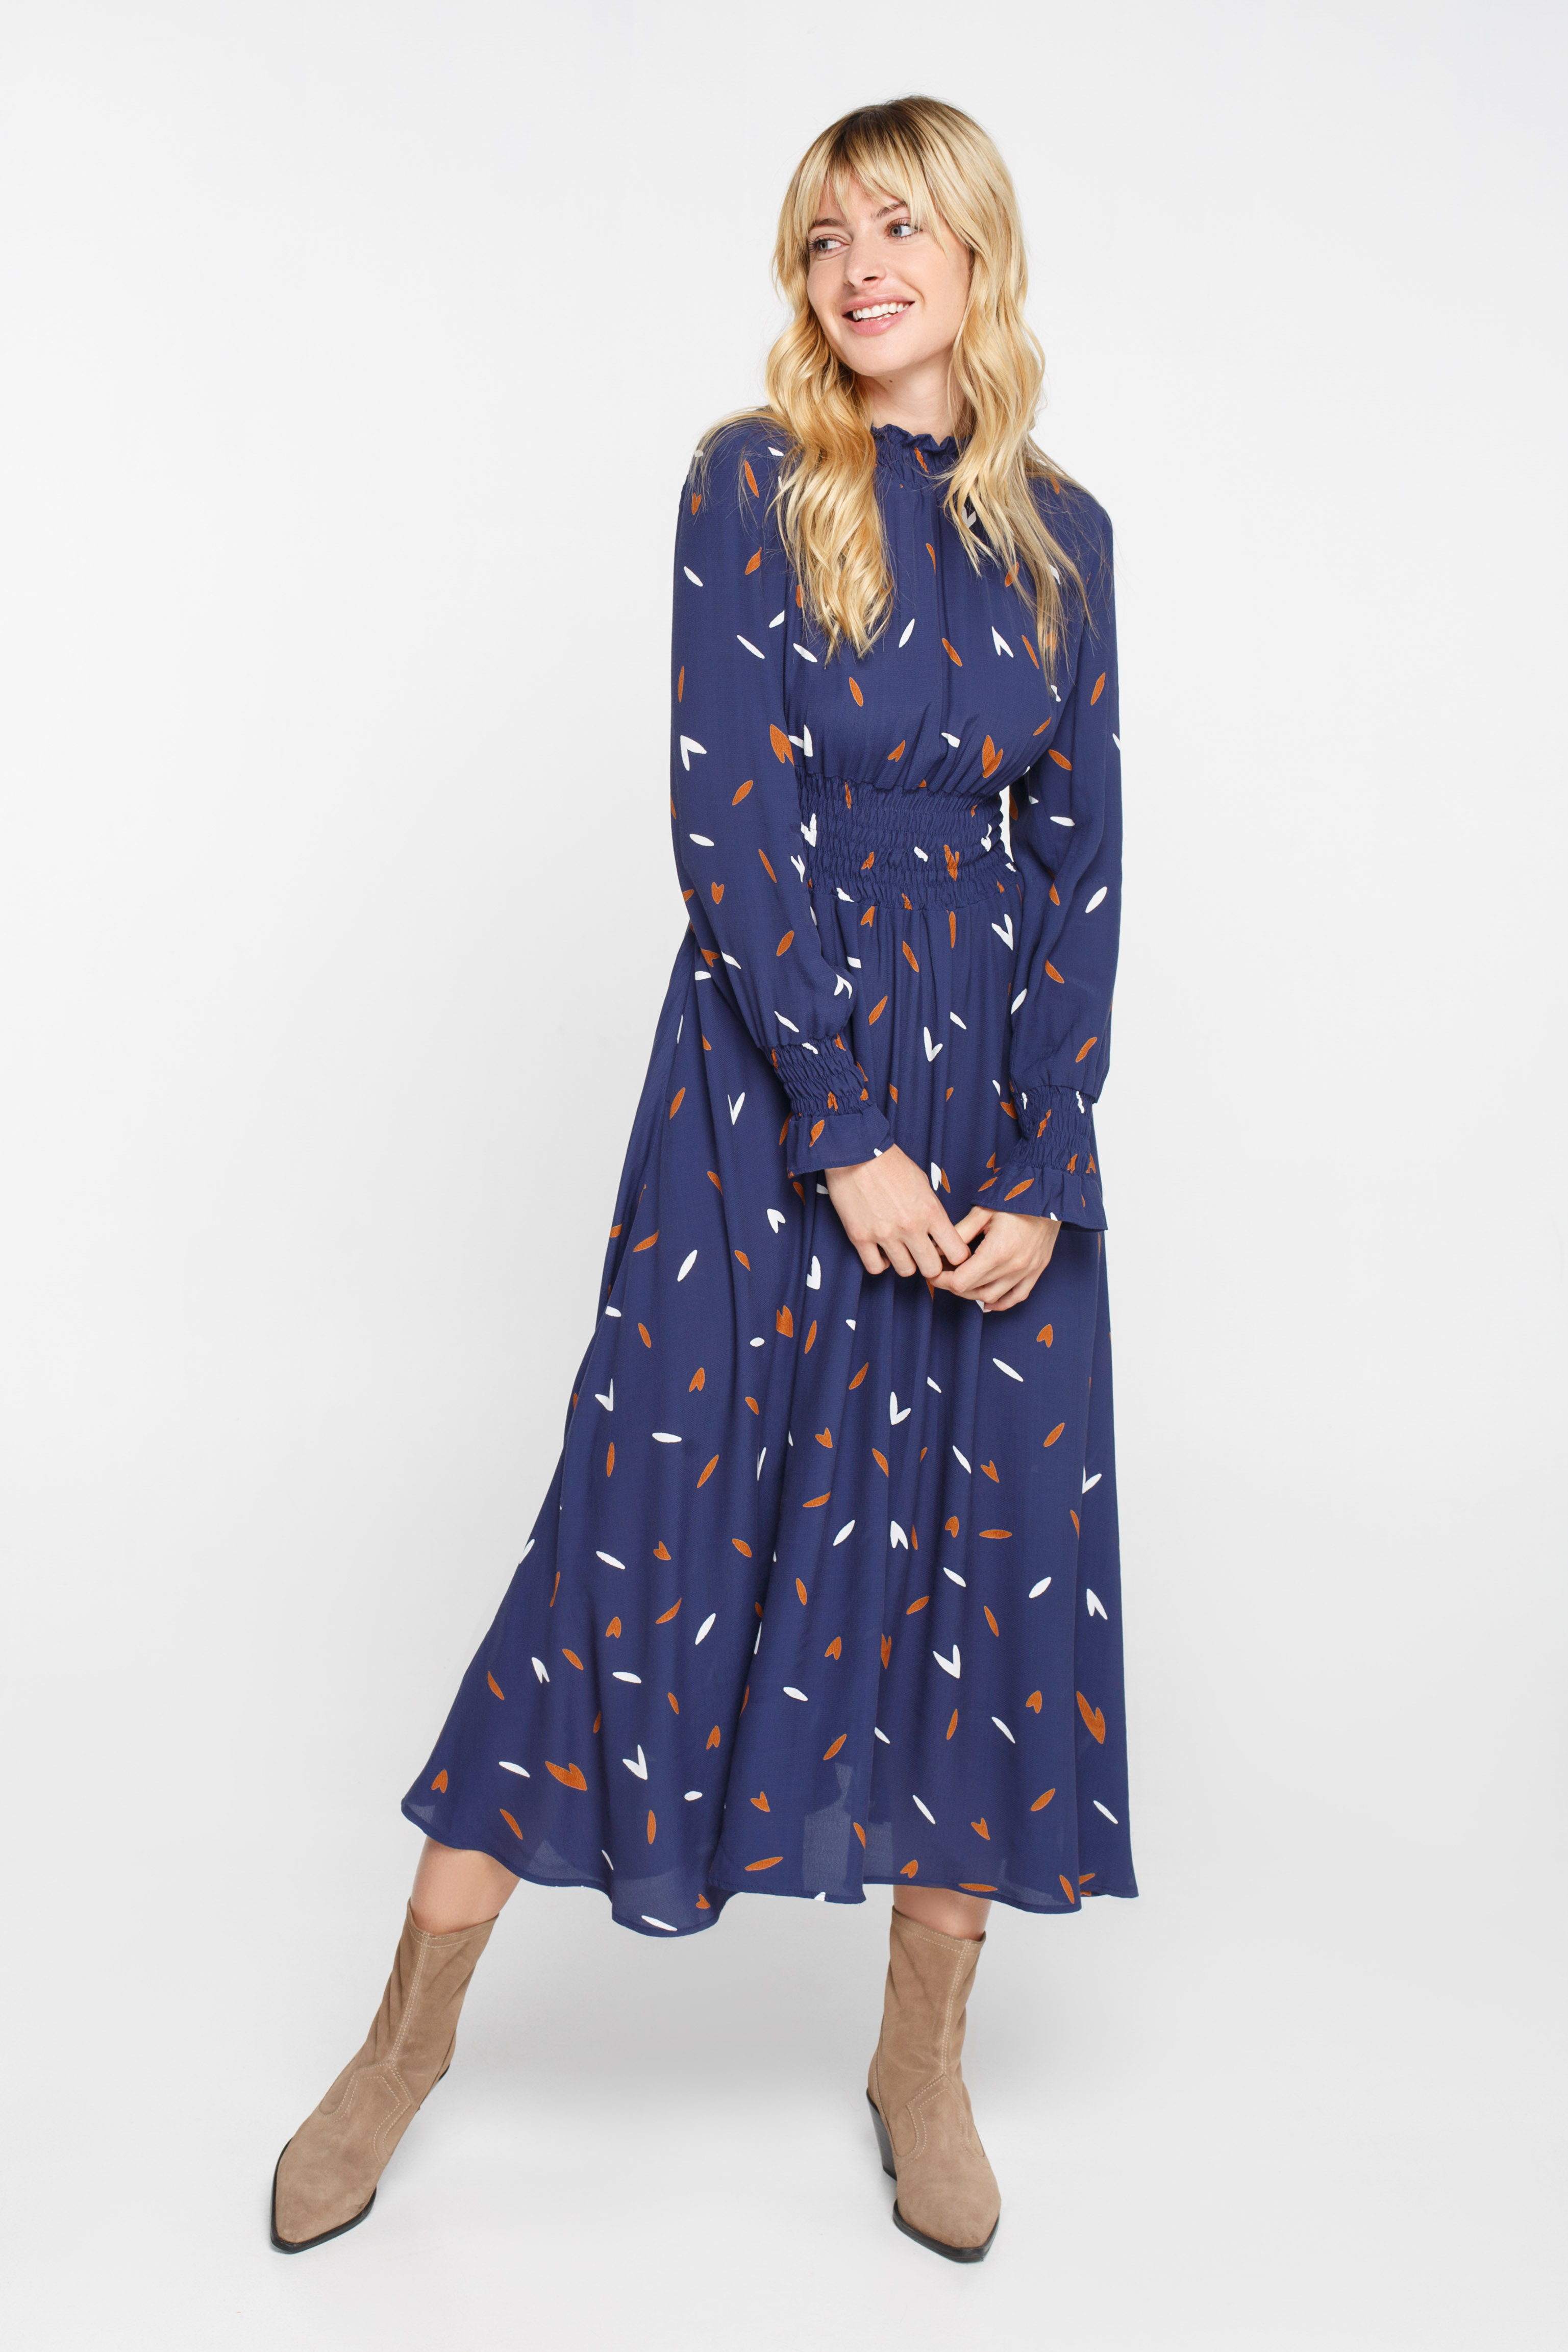 Blue midi dress with elastic waistband and white-brown leaves pattern, photo 2